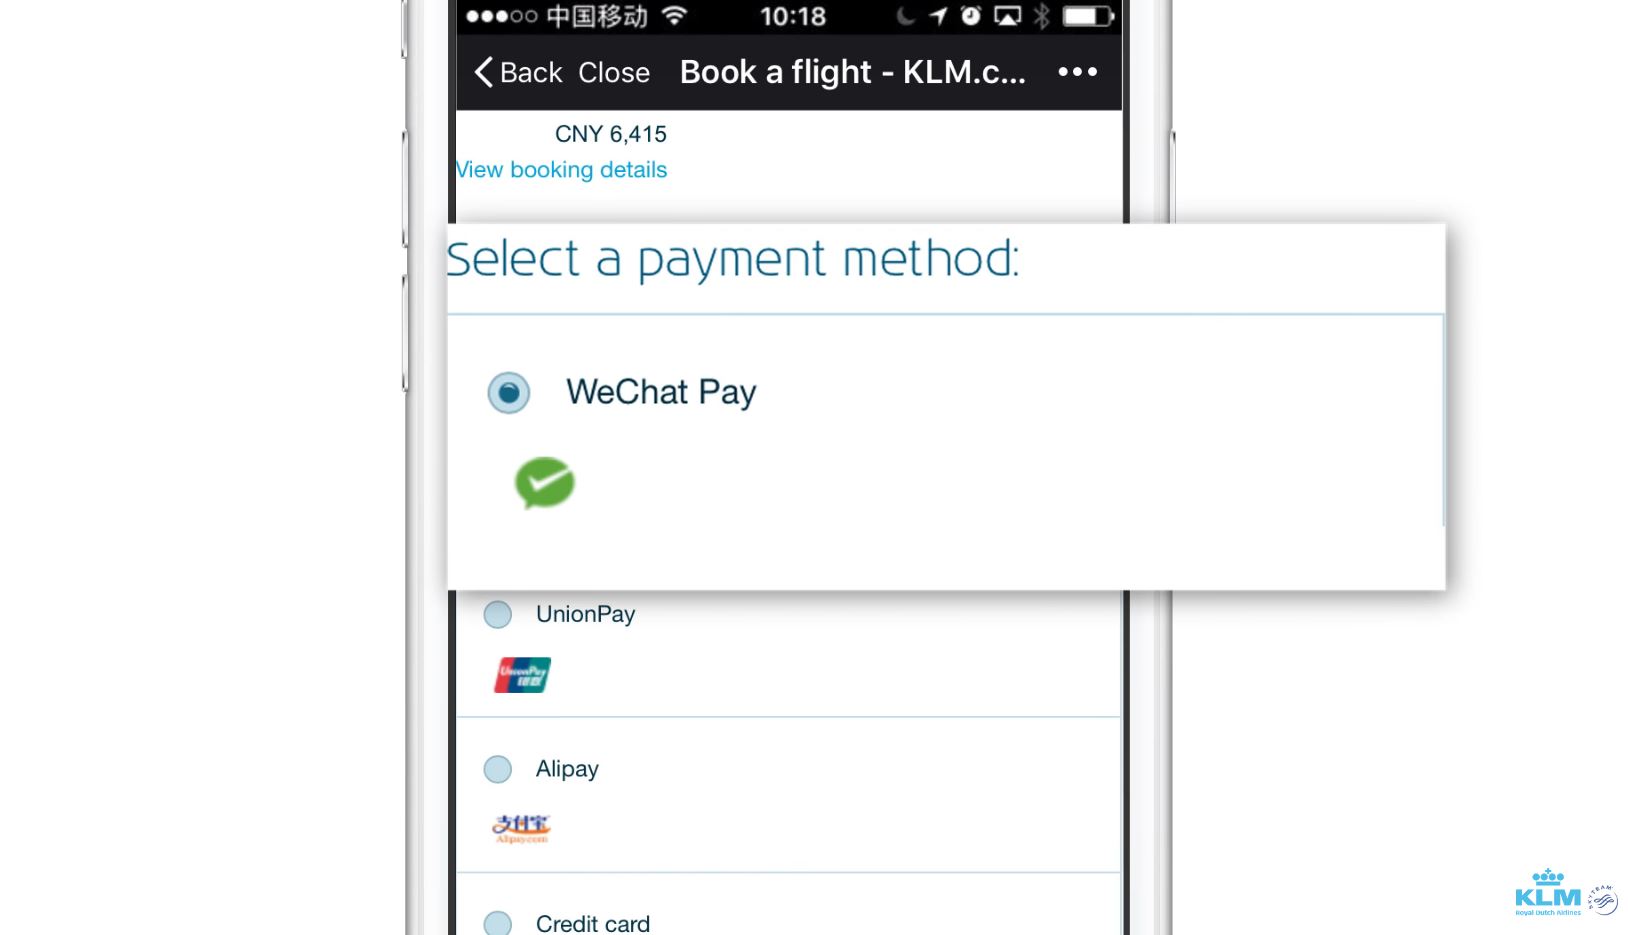 KLM introduces WeChat Pay